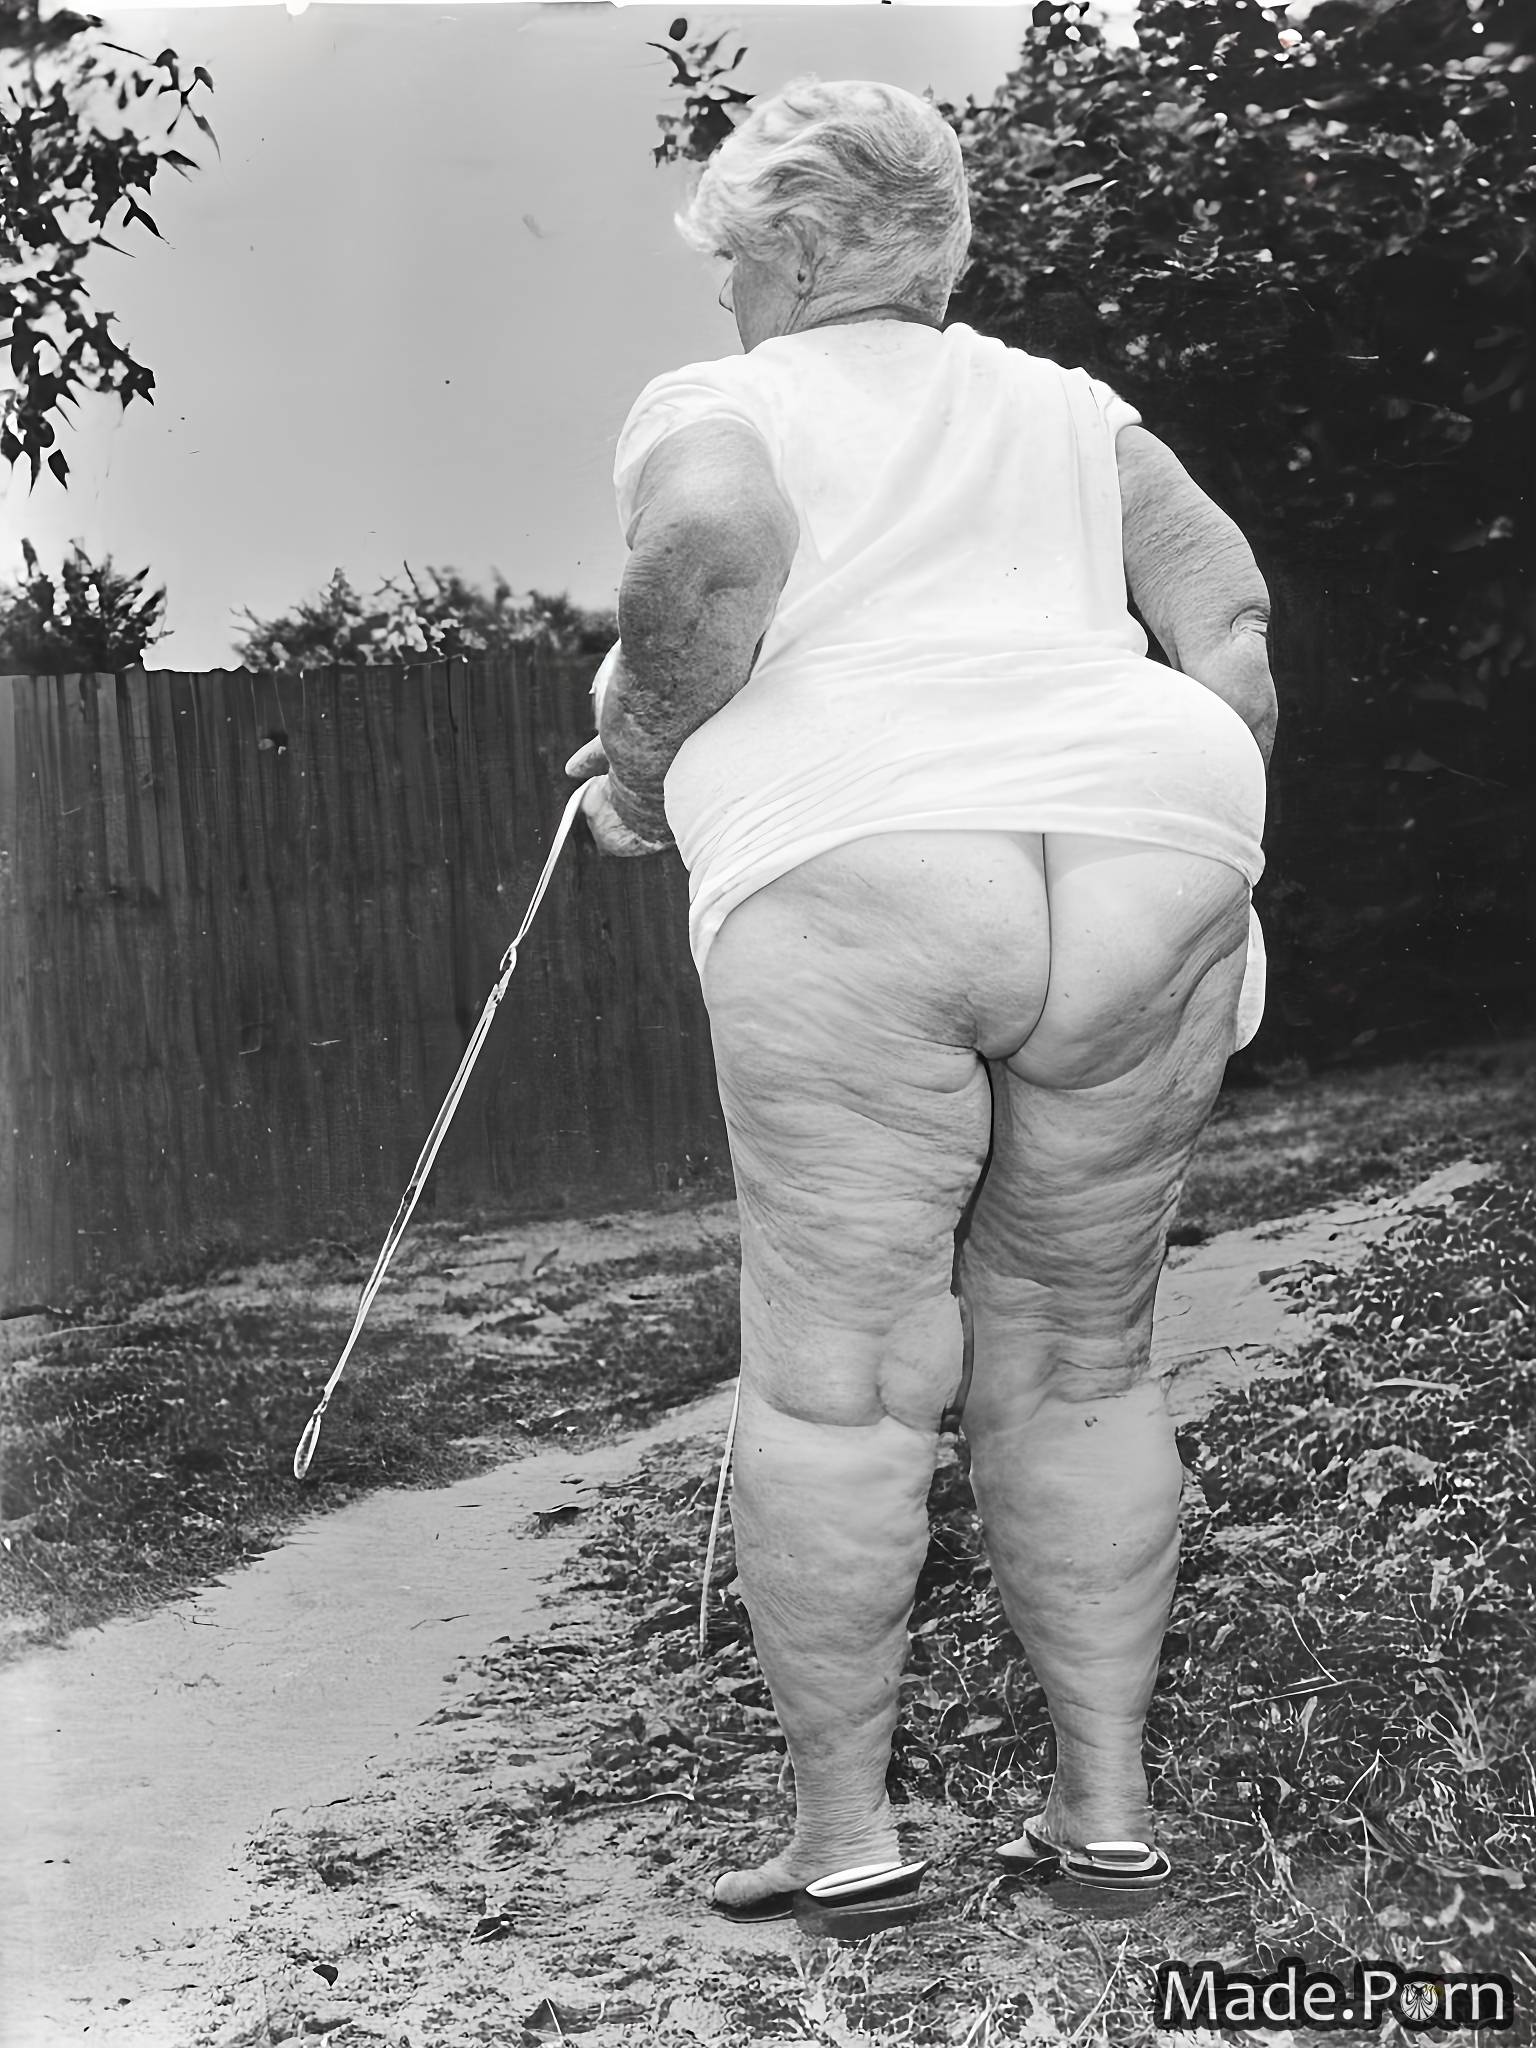 1940s Vintage Porn Plump Grandma - Porn image of 50s panty pull 40s big ass woman ssbbw fairer skin created by  AI